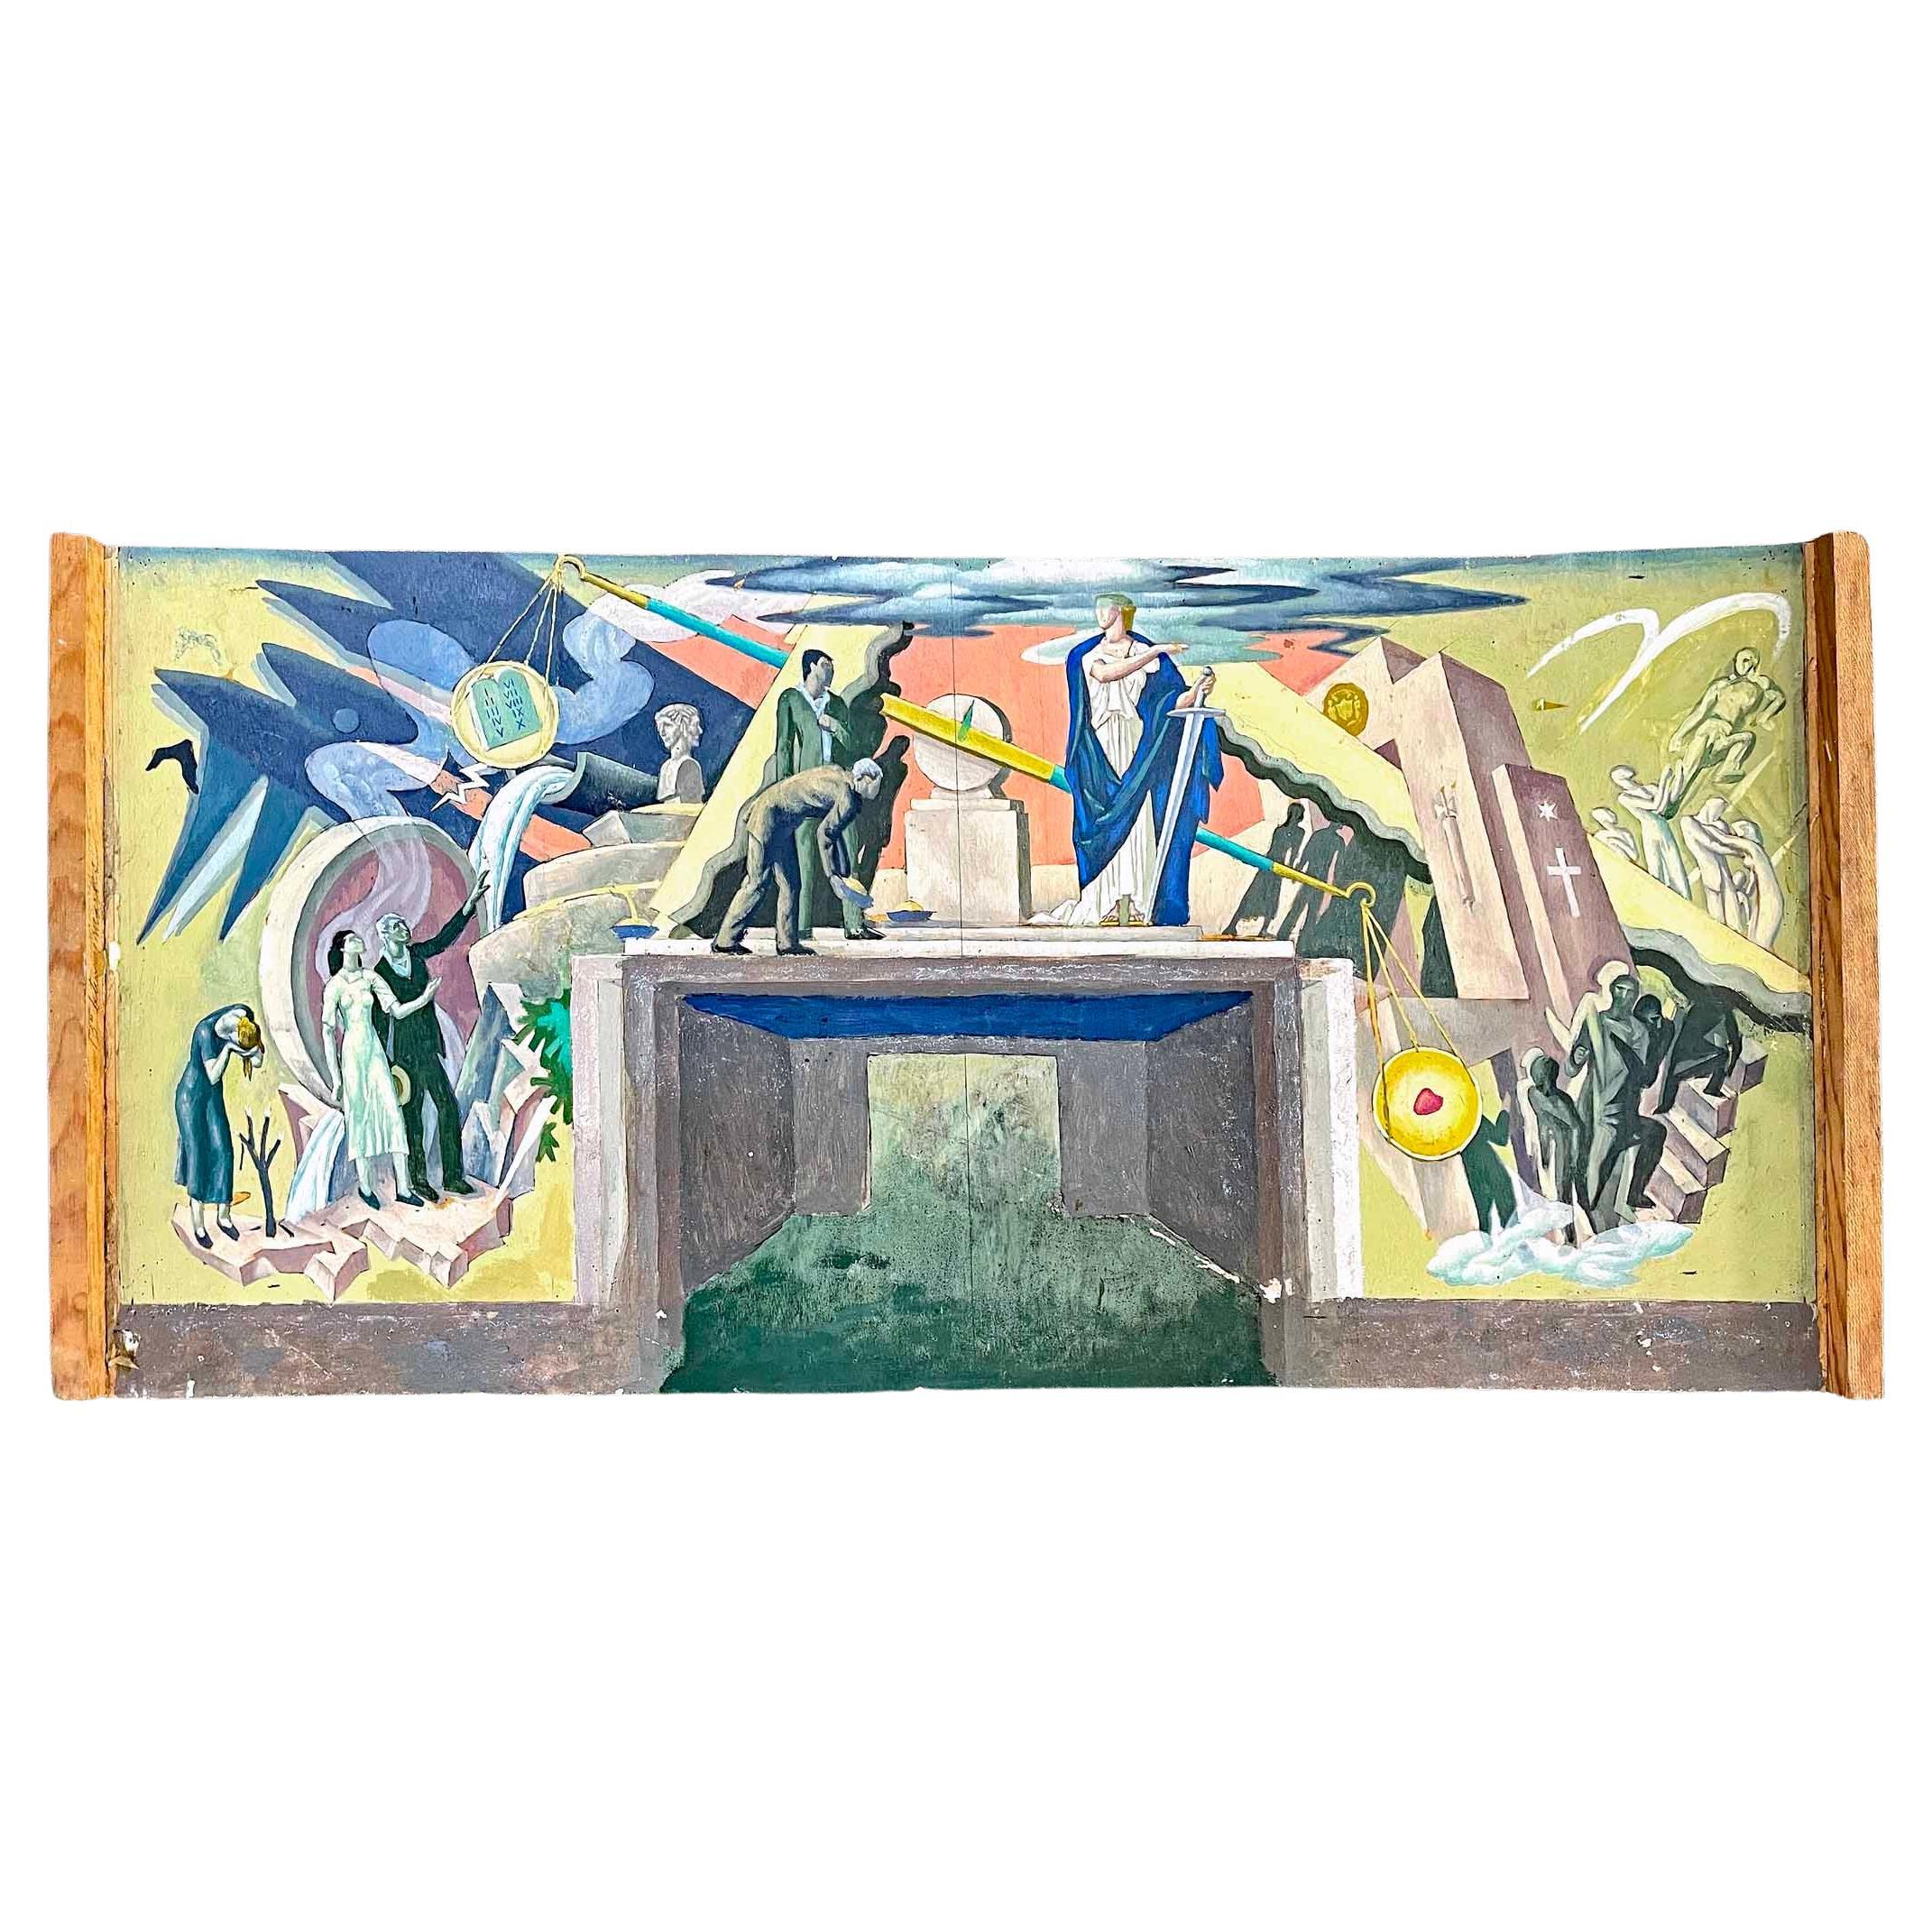 "Justice Triumphant", Mural Study for Queens, Ny Courthouse, circa 1941-1942 For Sale